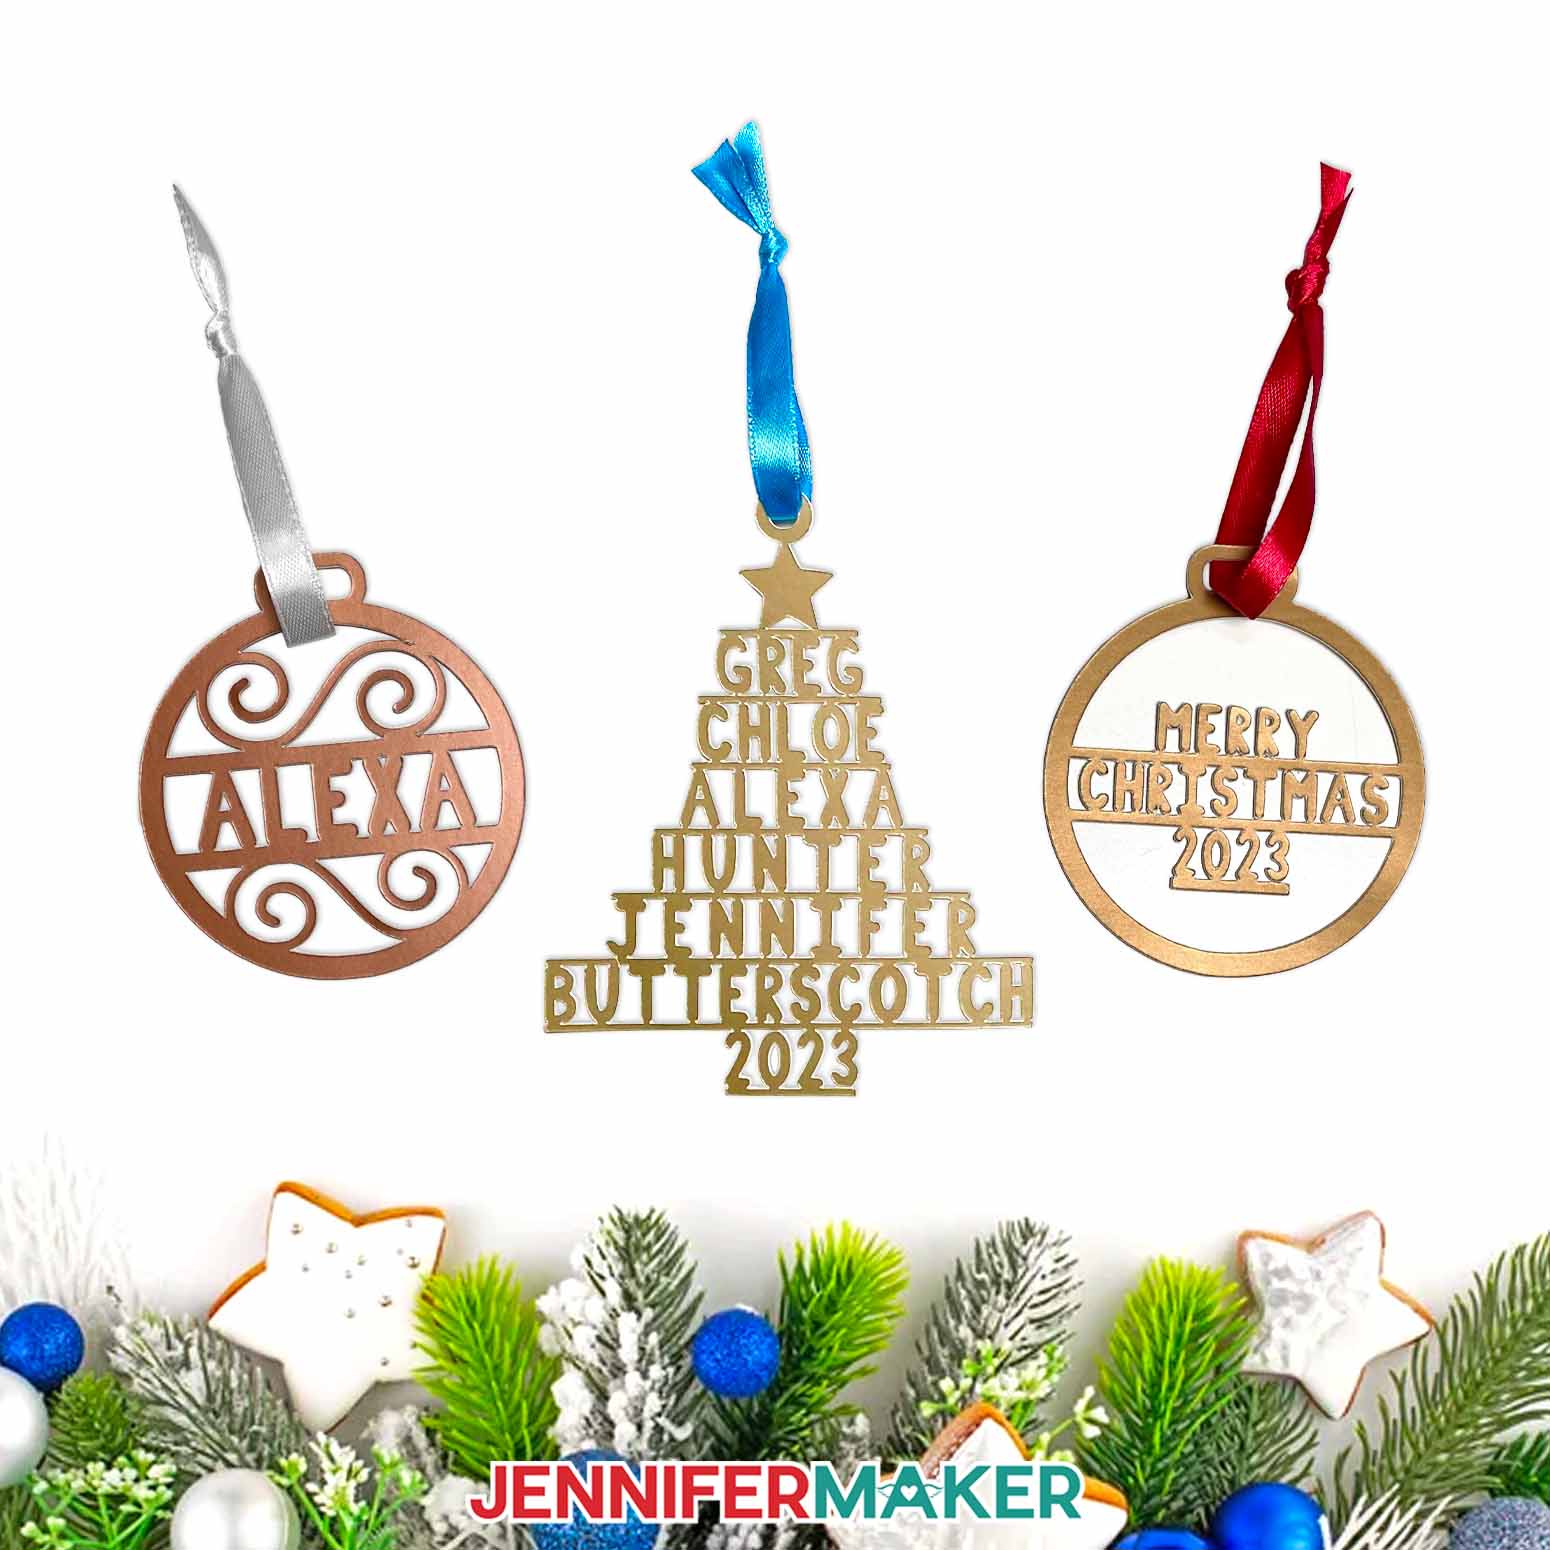 Customized Holiday Wood Ornaments (Ink Imprint)